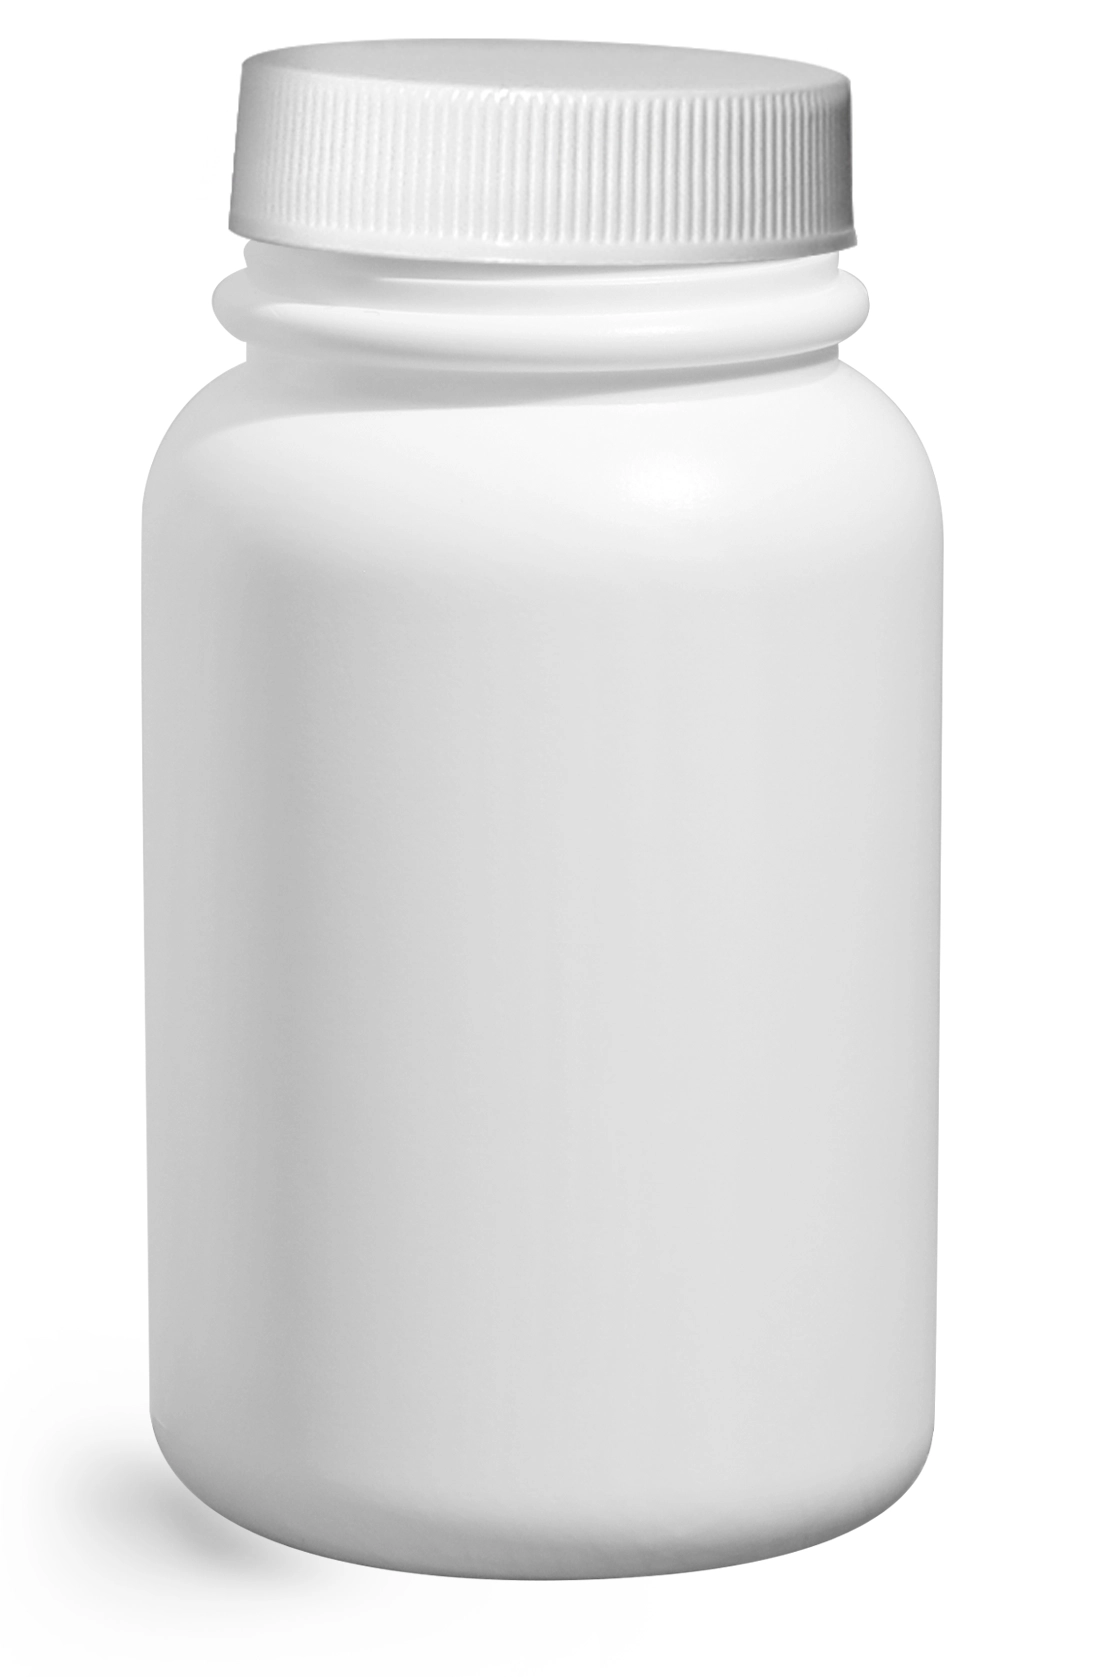 120 cc Plastic Bottles, White HDPE Wide Mouth Pharmaceutical Rounds w/ White Lined Caps